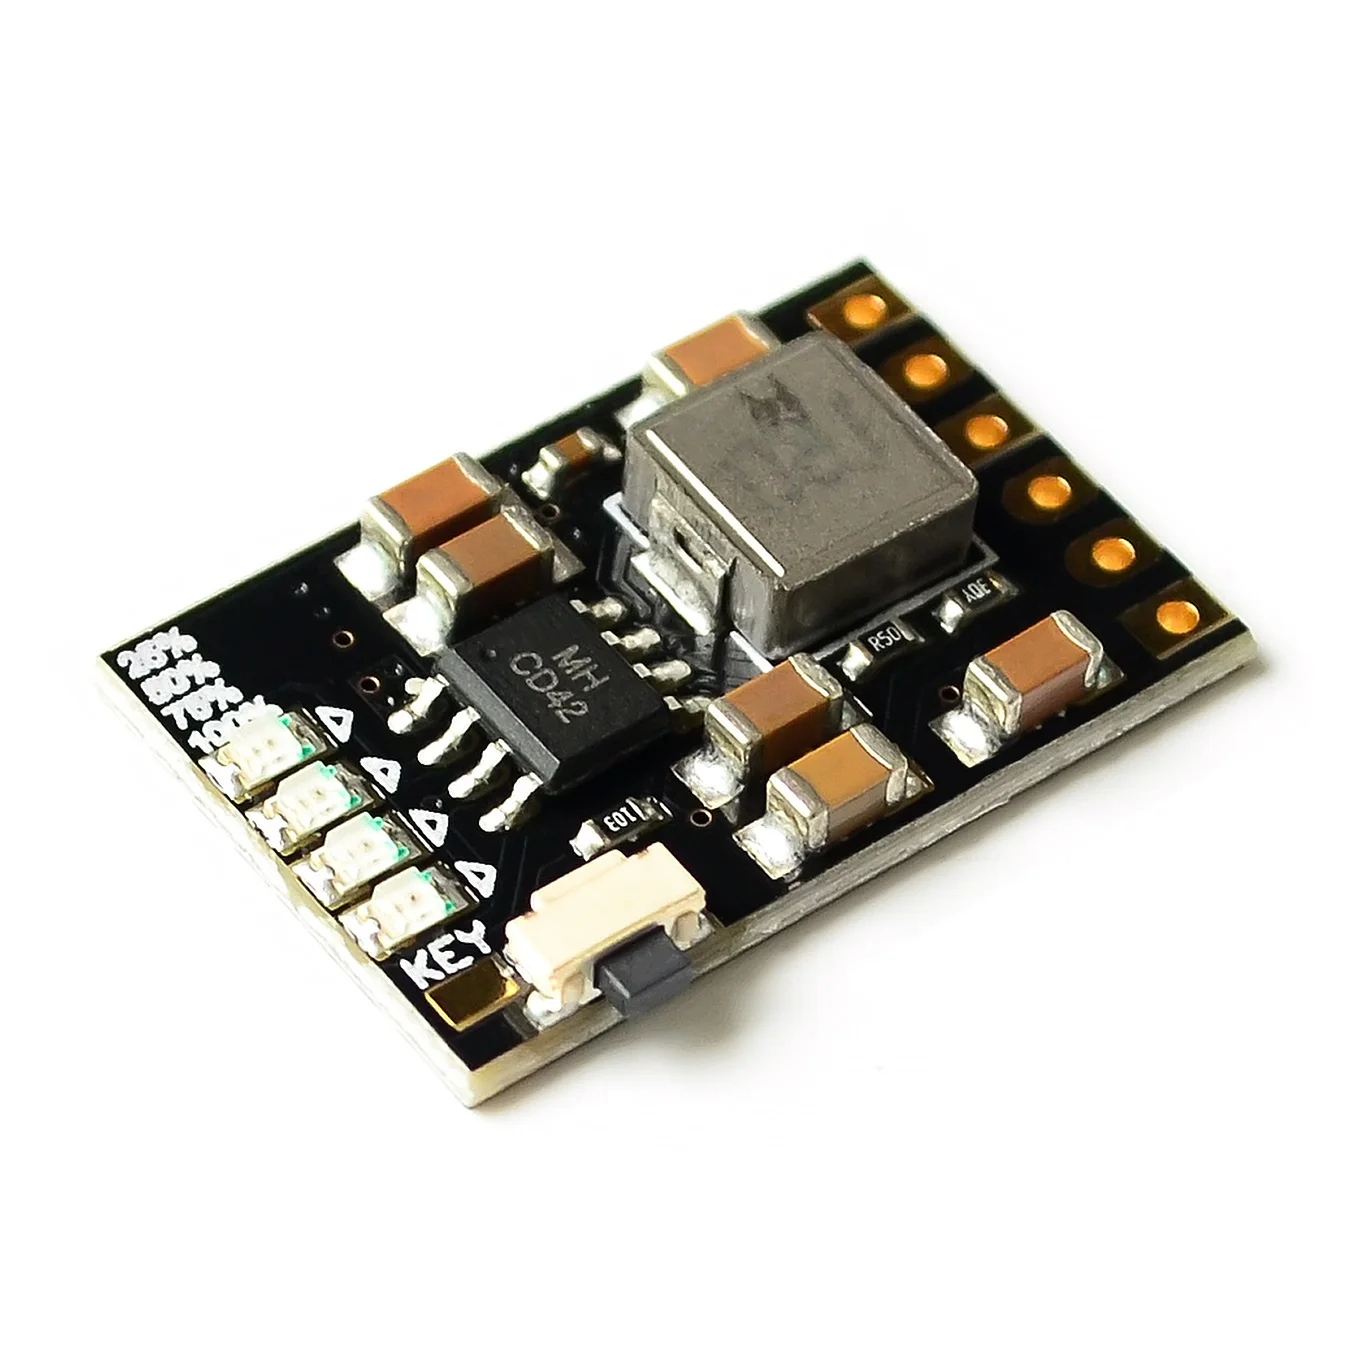 

DC 5V 2.1A Mobile Power Diy Board 4.2V Charge / Discharge Boost Battery Protection Indicator Module 3.7V Lithium 18650